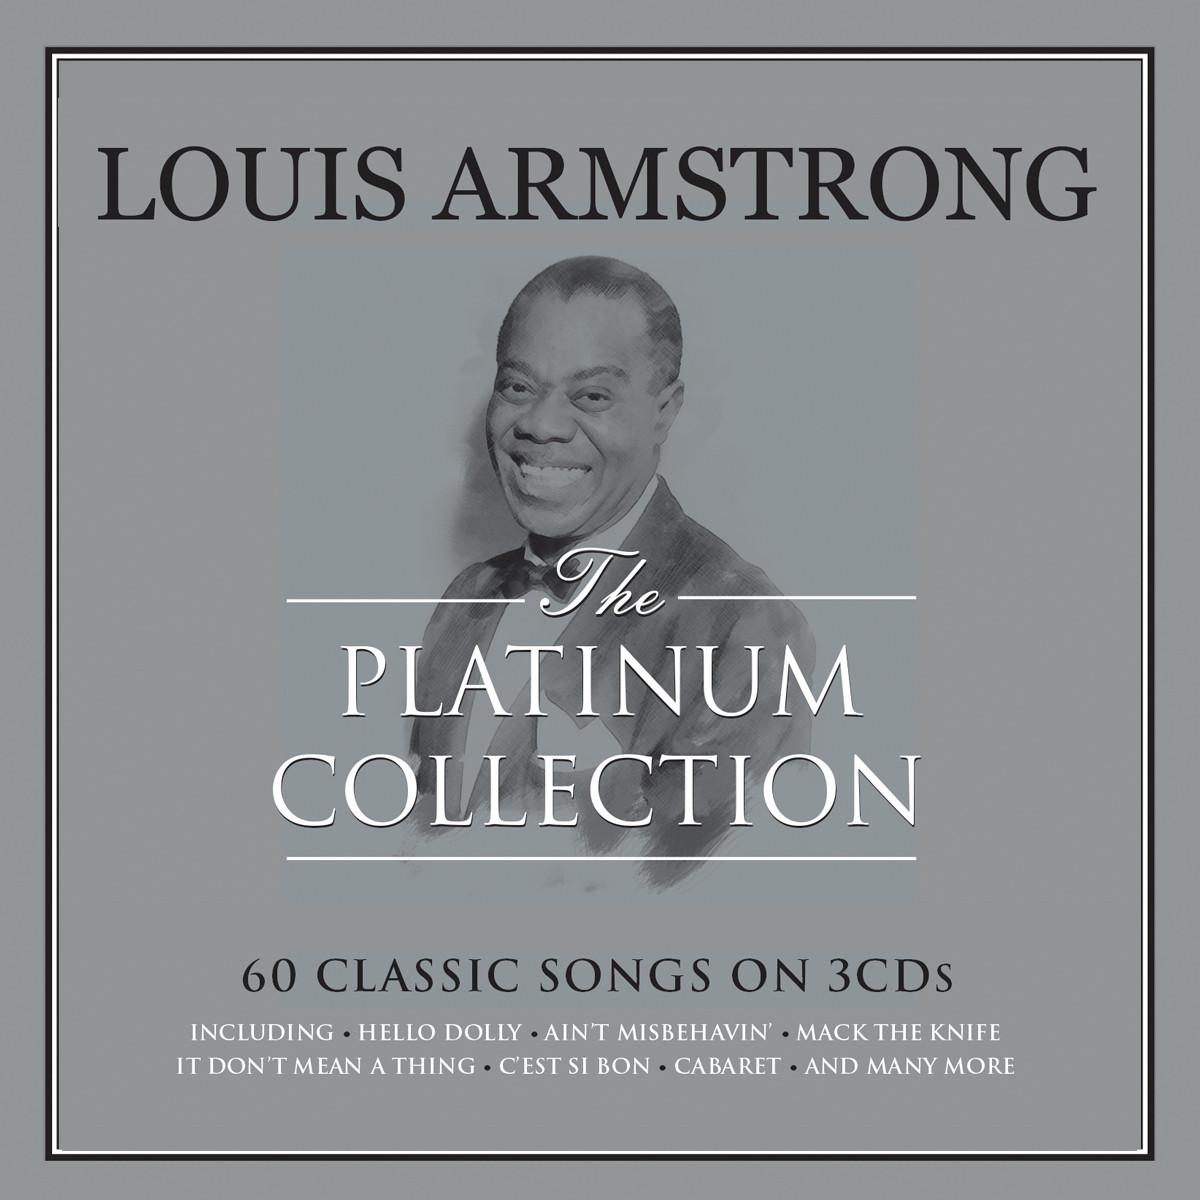 LOUIS ARMSTRONG - PLATINUM COLLECTION 3CD